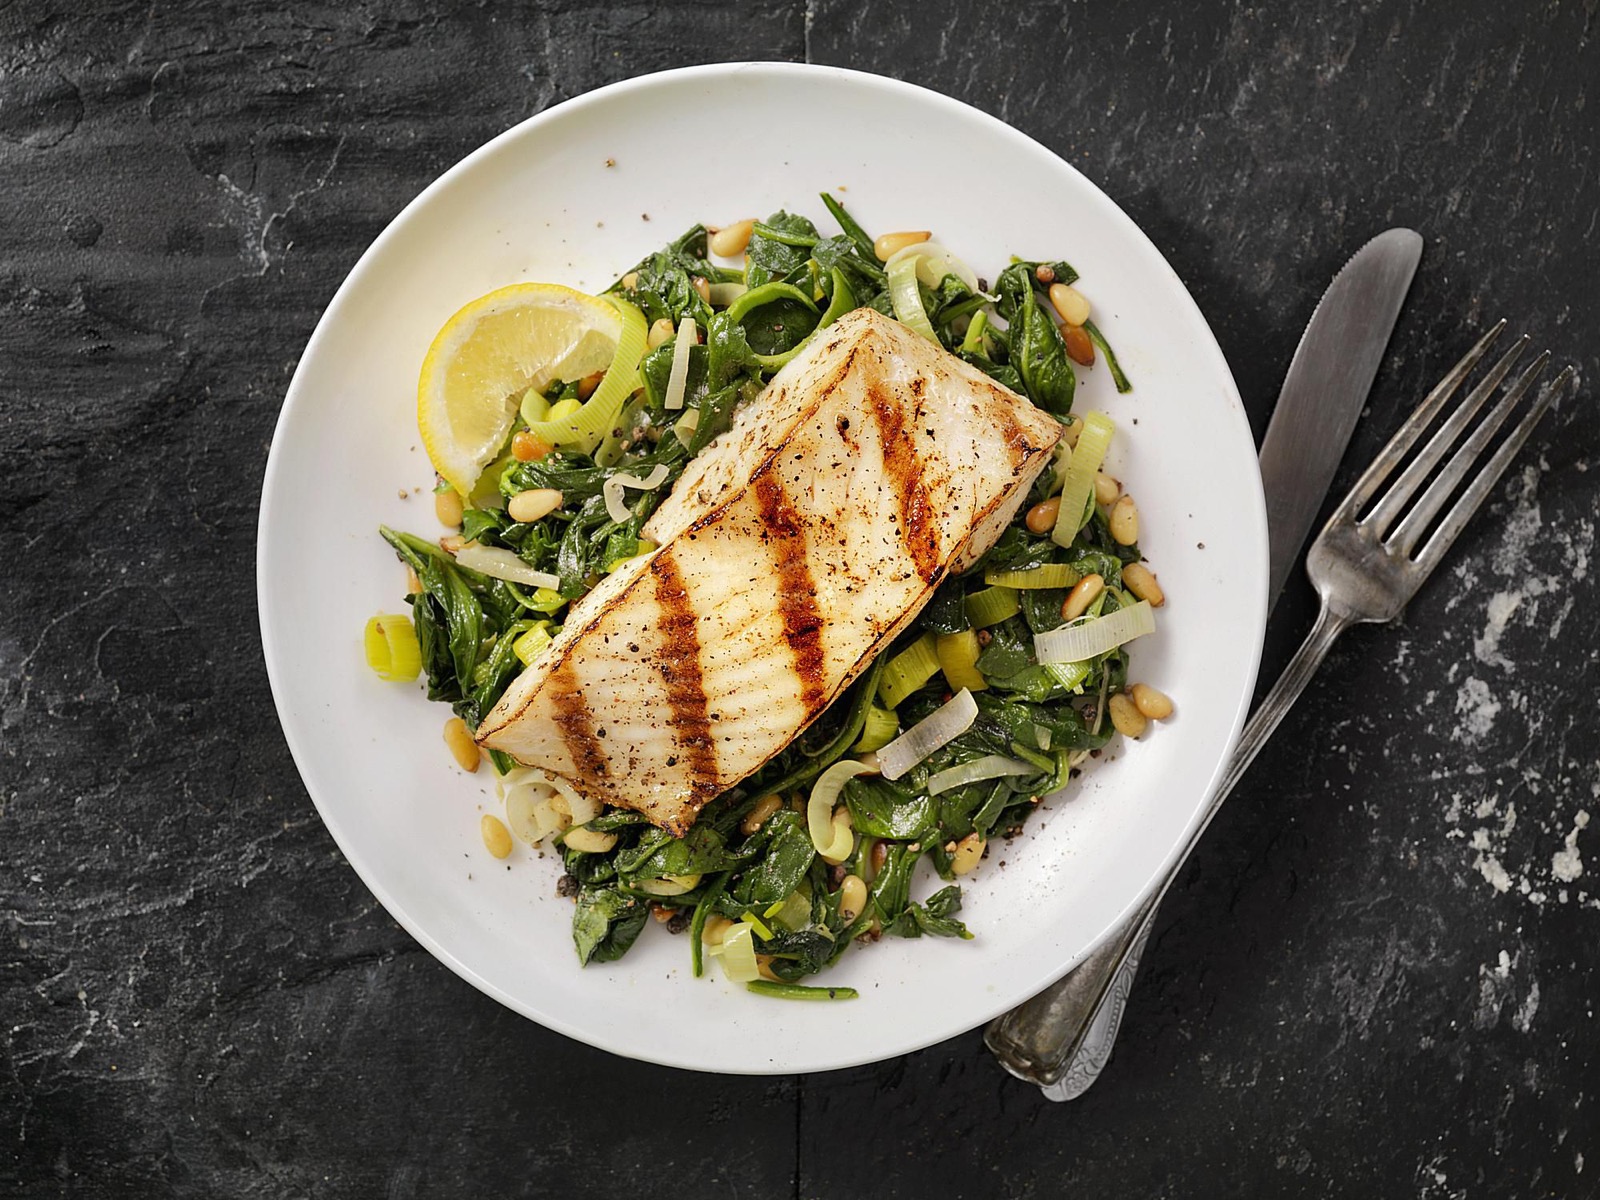 Say Yum Or Yuck to Seafood Dishes to Know How Picky You… Quiz Grilled Halibut